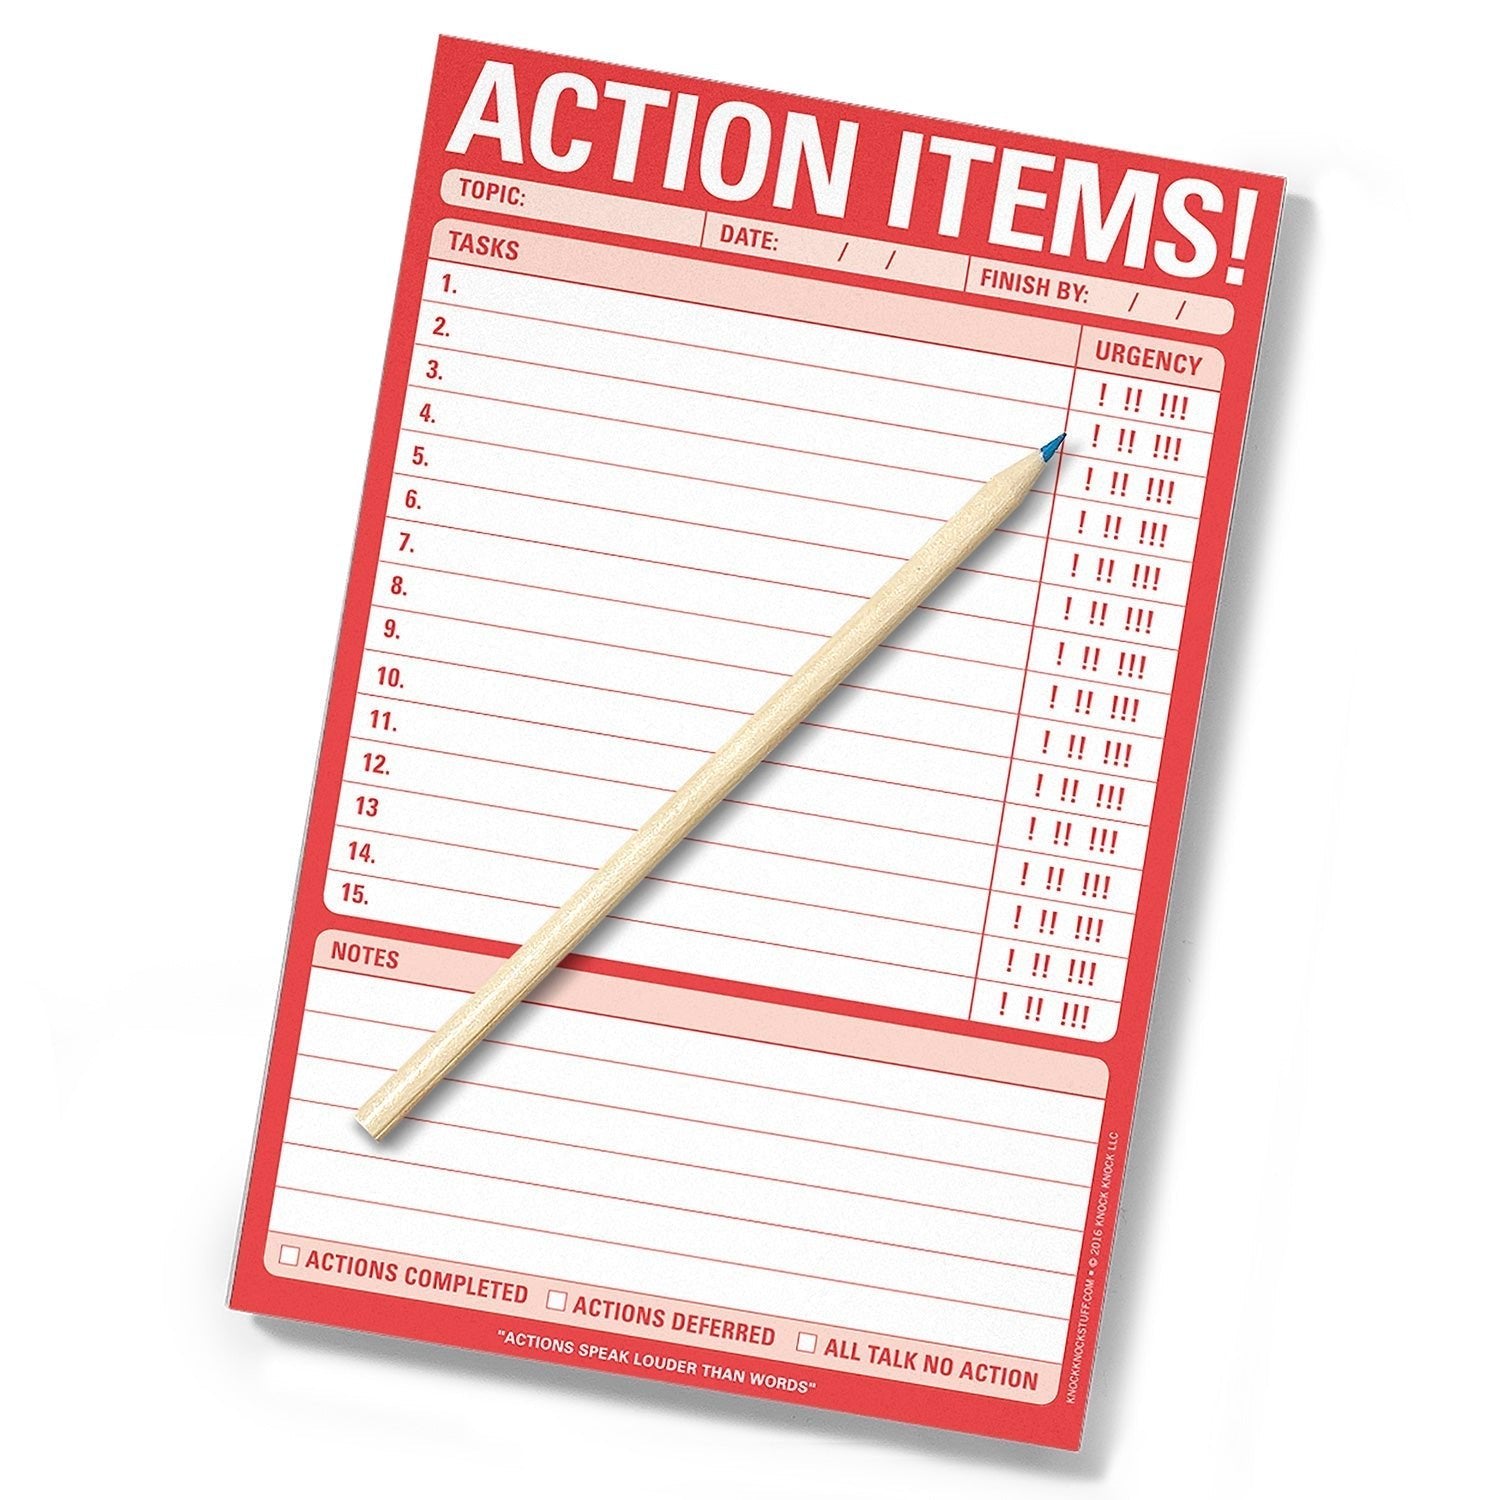 Action Items! Task List Planner Pad in Red